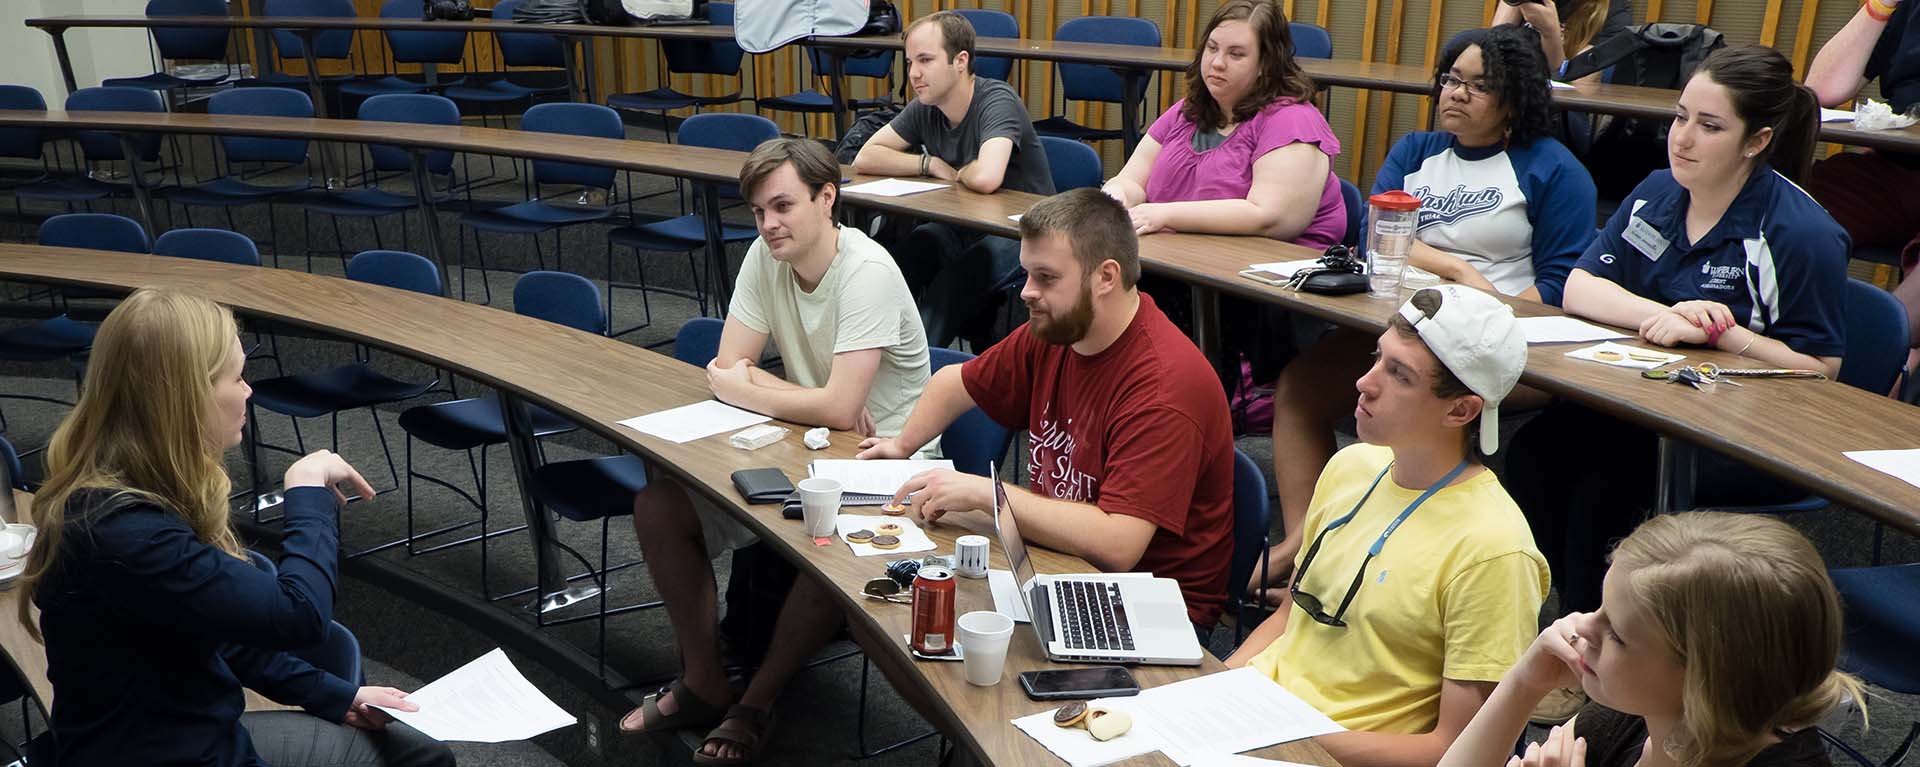 Washburn political science professor Lindsey Moddelmog speaks to students during a class.